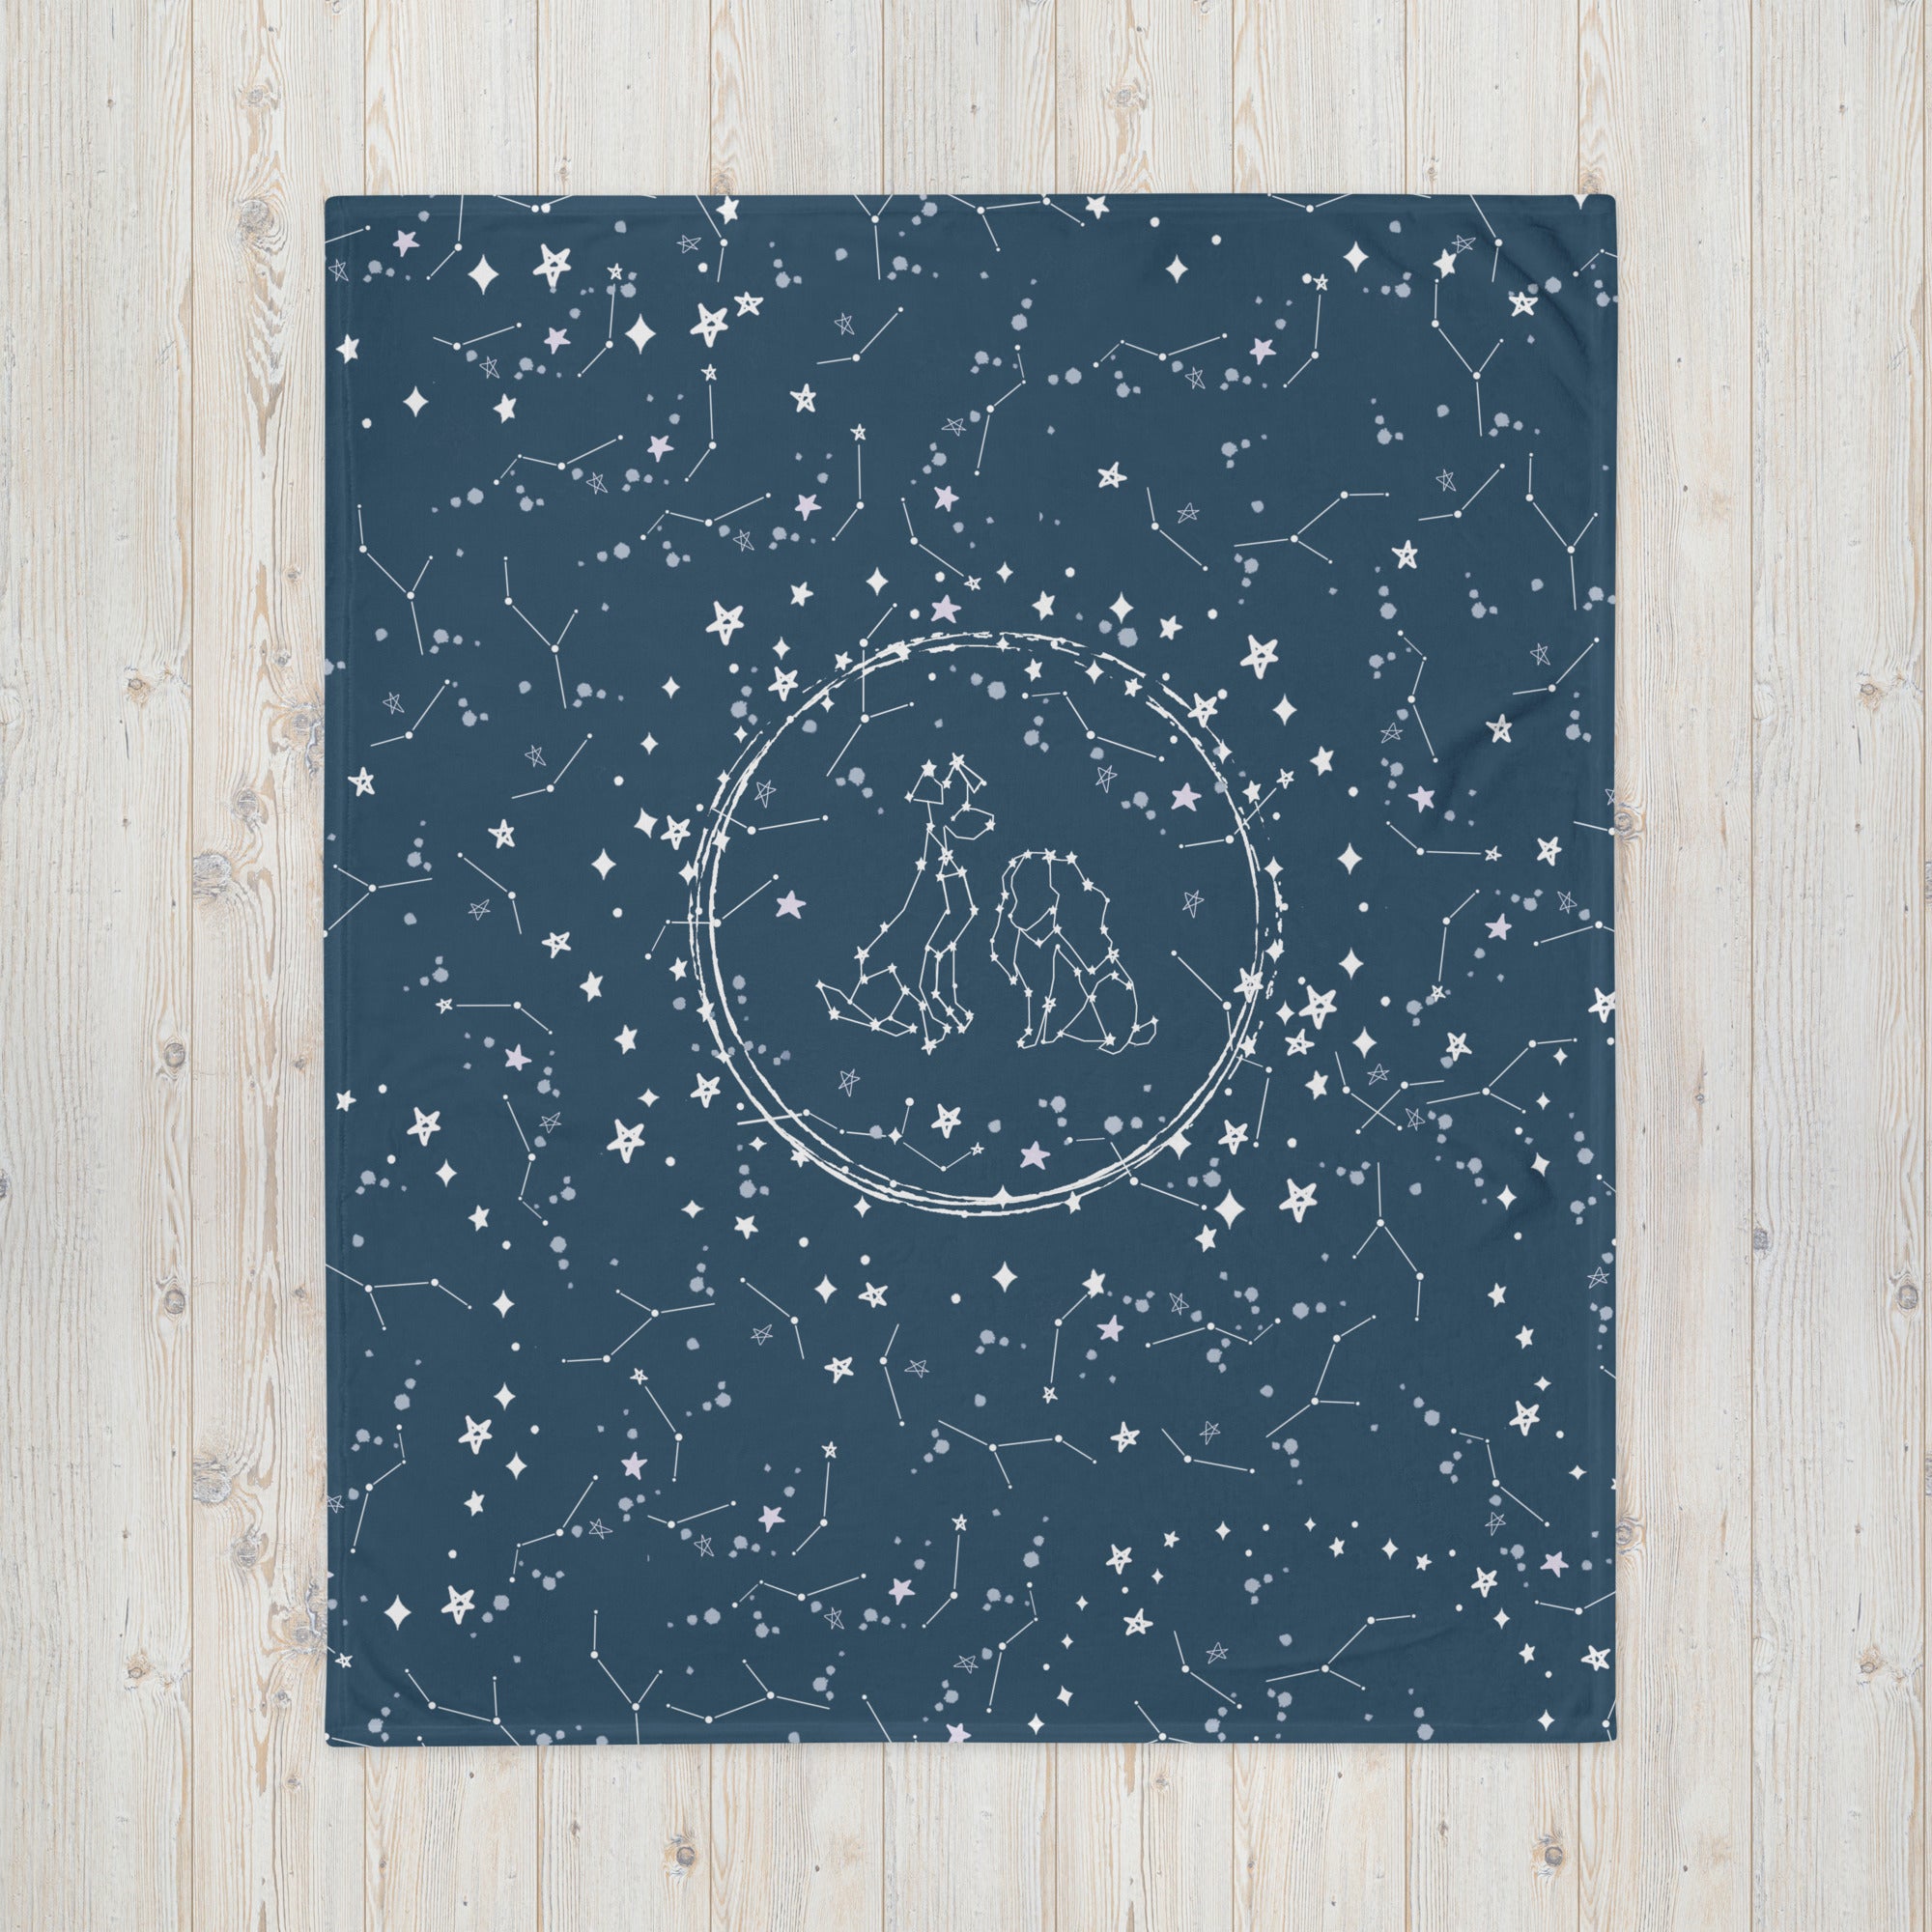 Bella Notte Throw Blanket Lady and the Tramp Disney Constellation Stars Throw Blanket